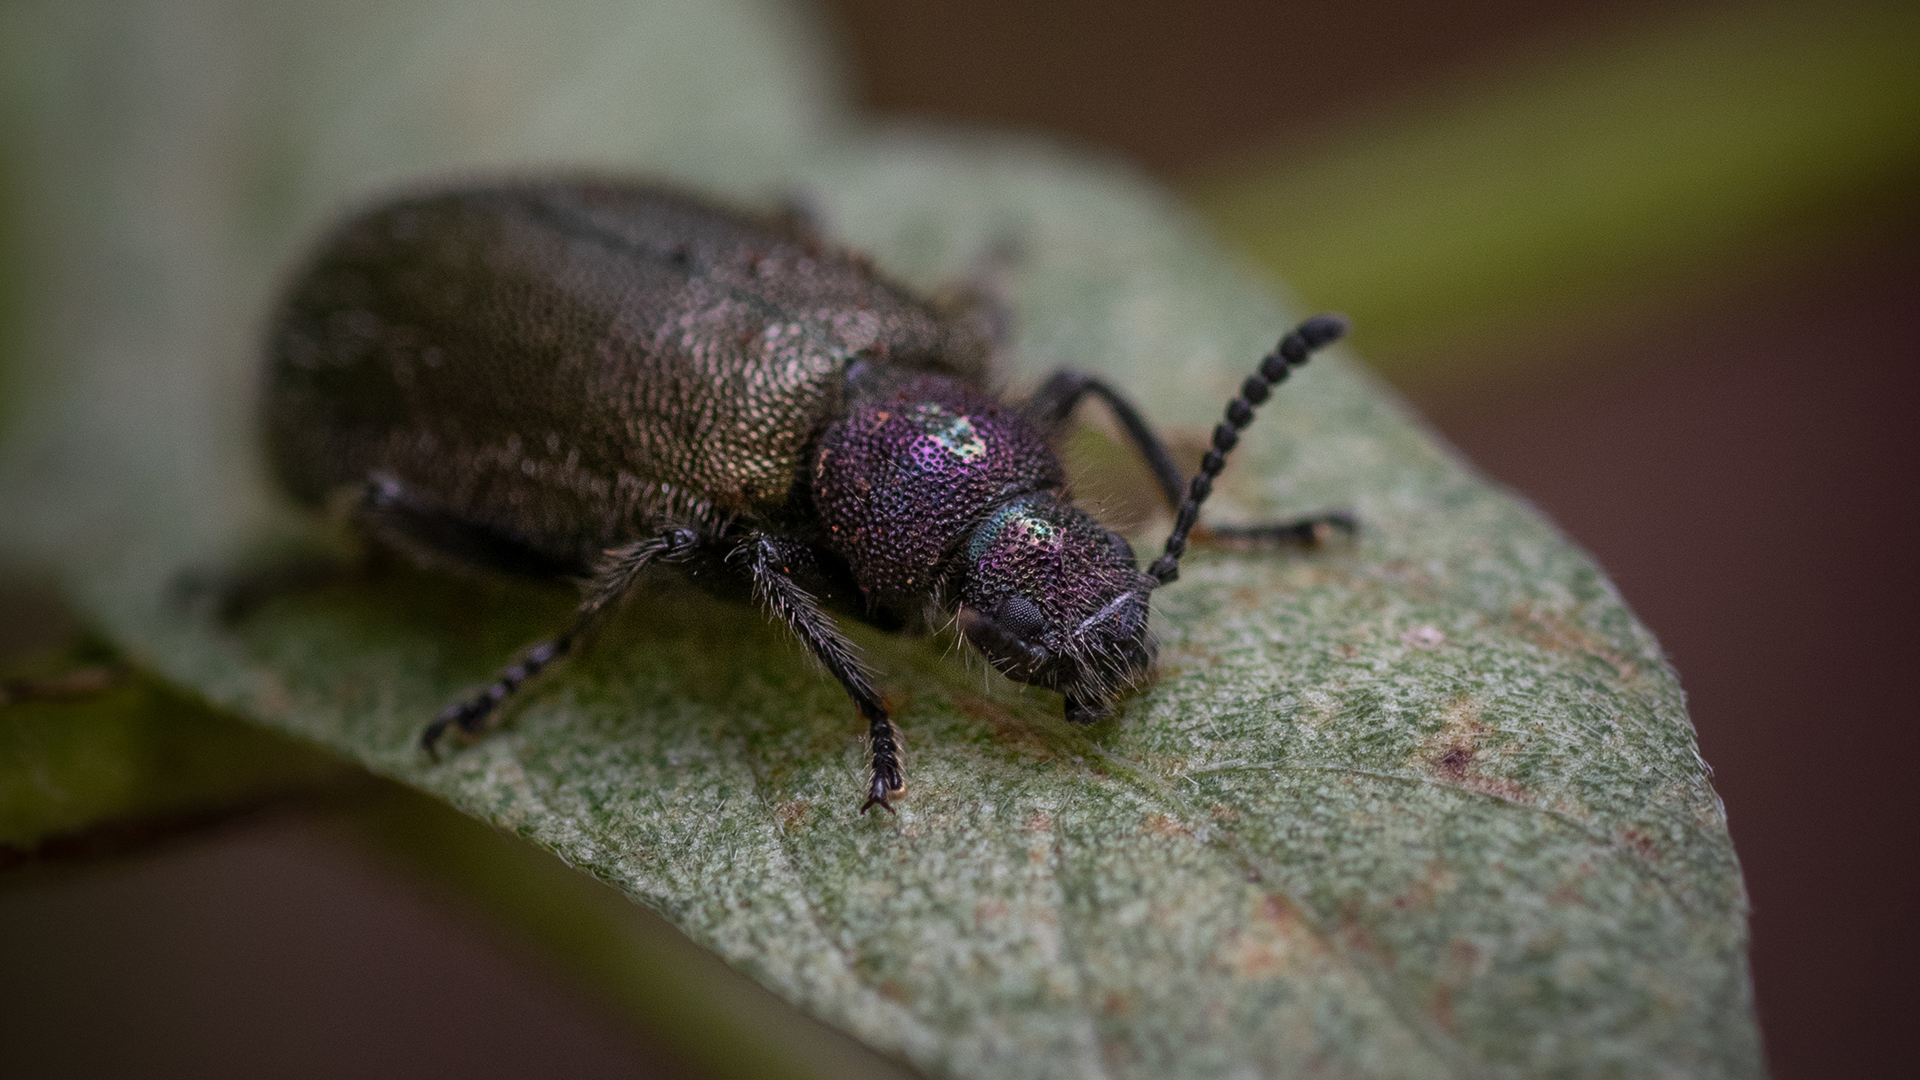 Only adult Lagria beetles carry symbiotic bacteria that are deposited on beetle eggs.